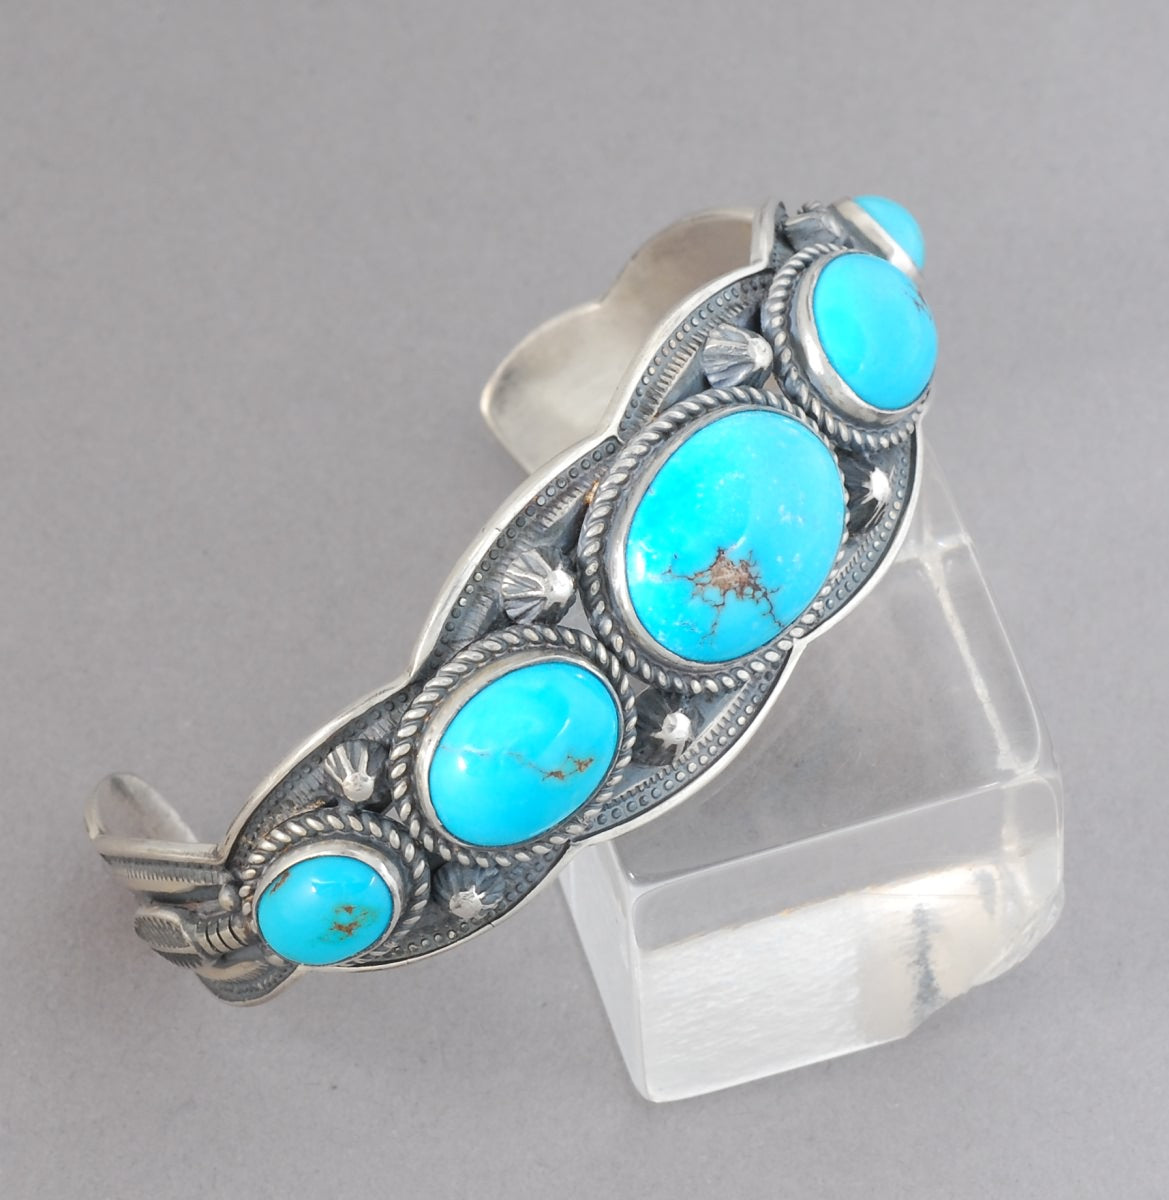 Cuff Bracelet with Old Persian Turquoise by Leonard Chee